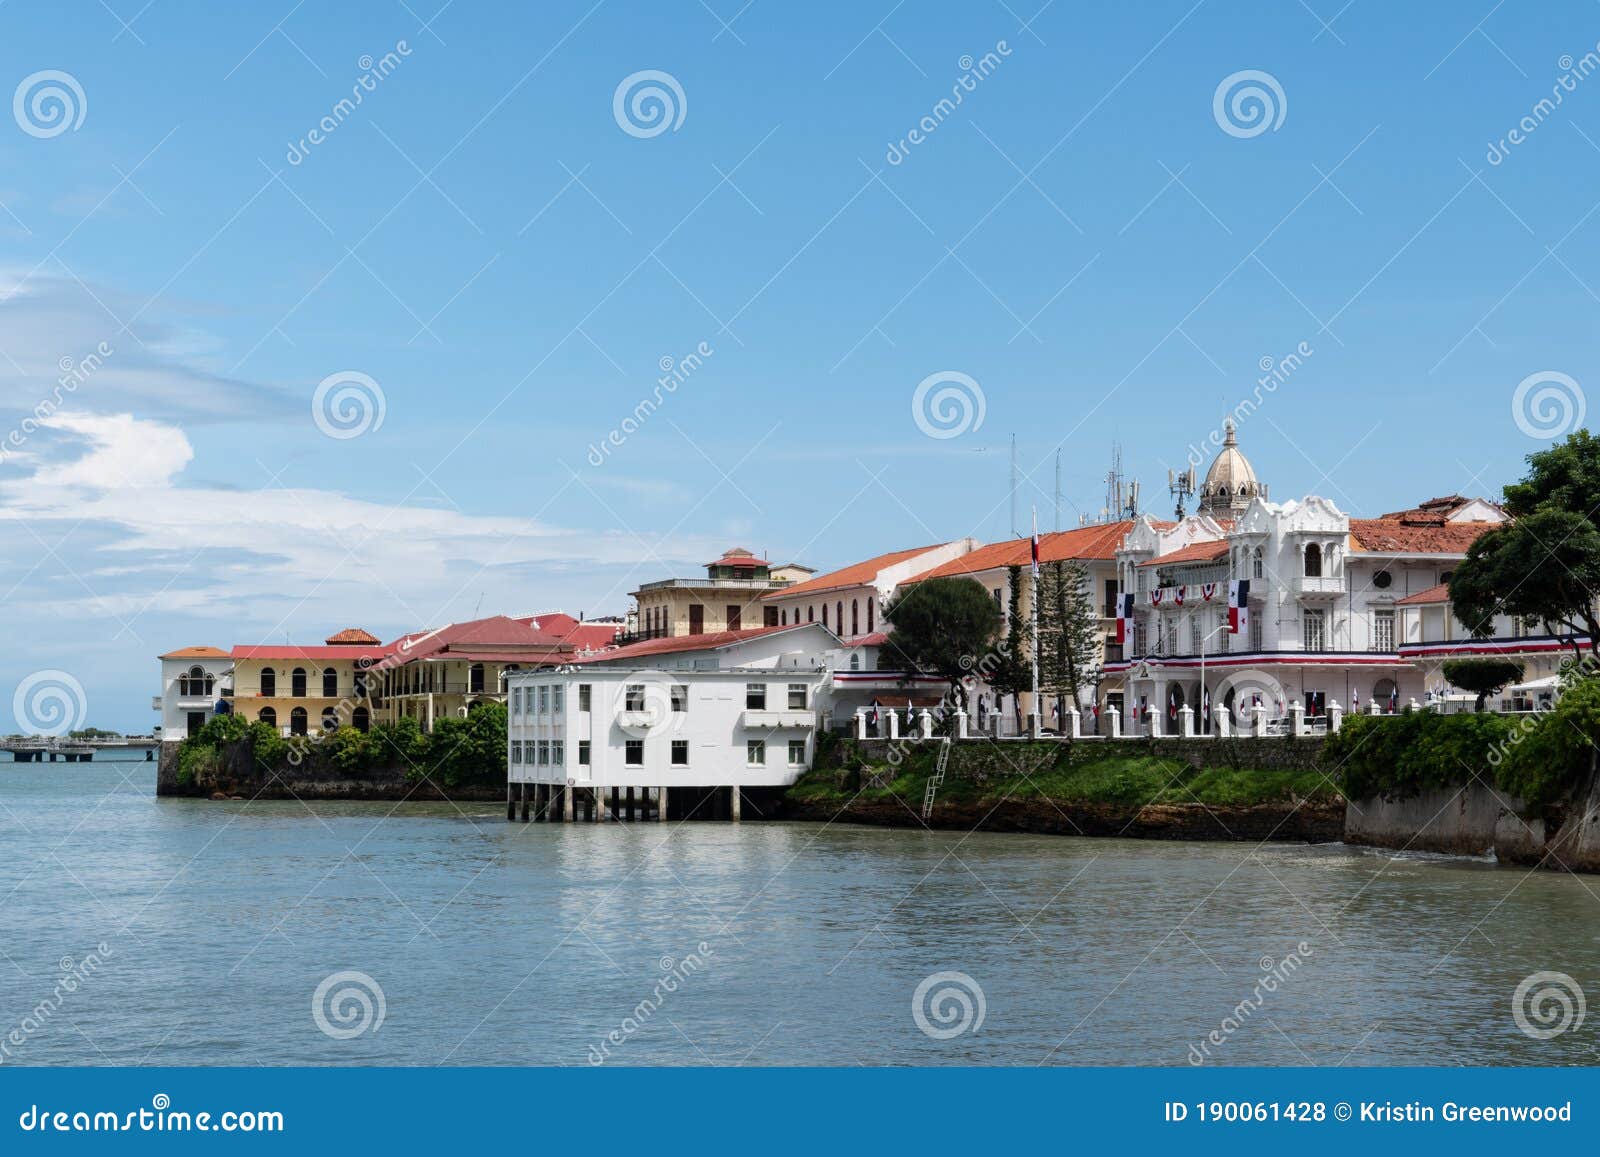 view of waterfront and buildings in casco antiguo in panama city